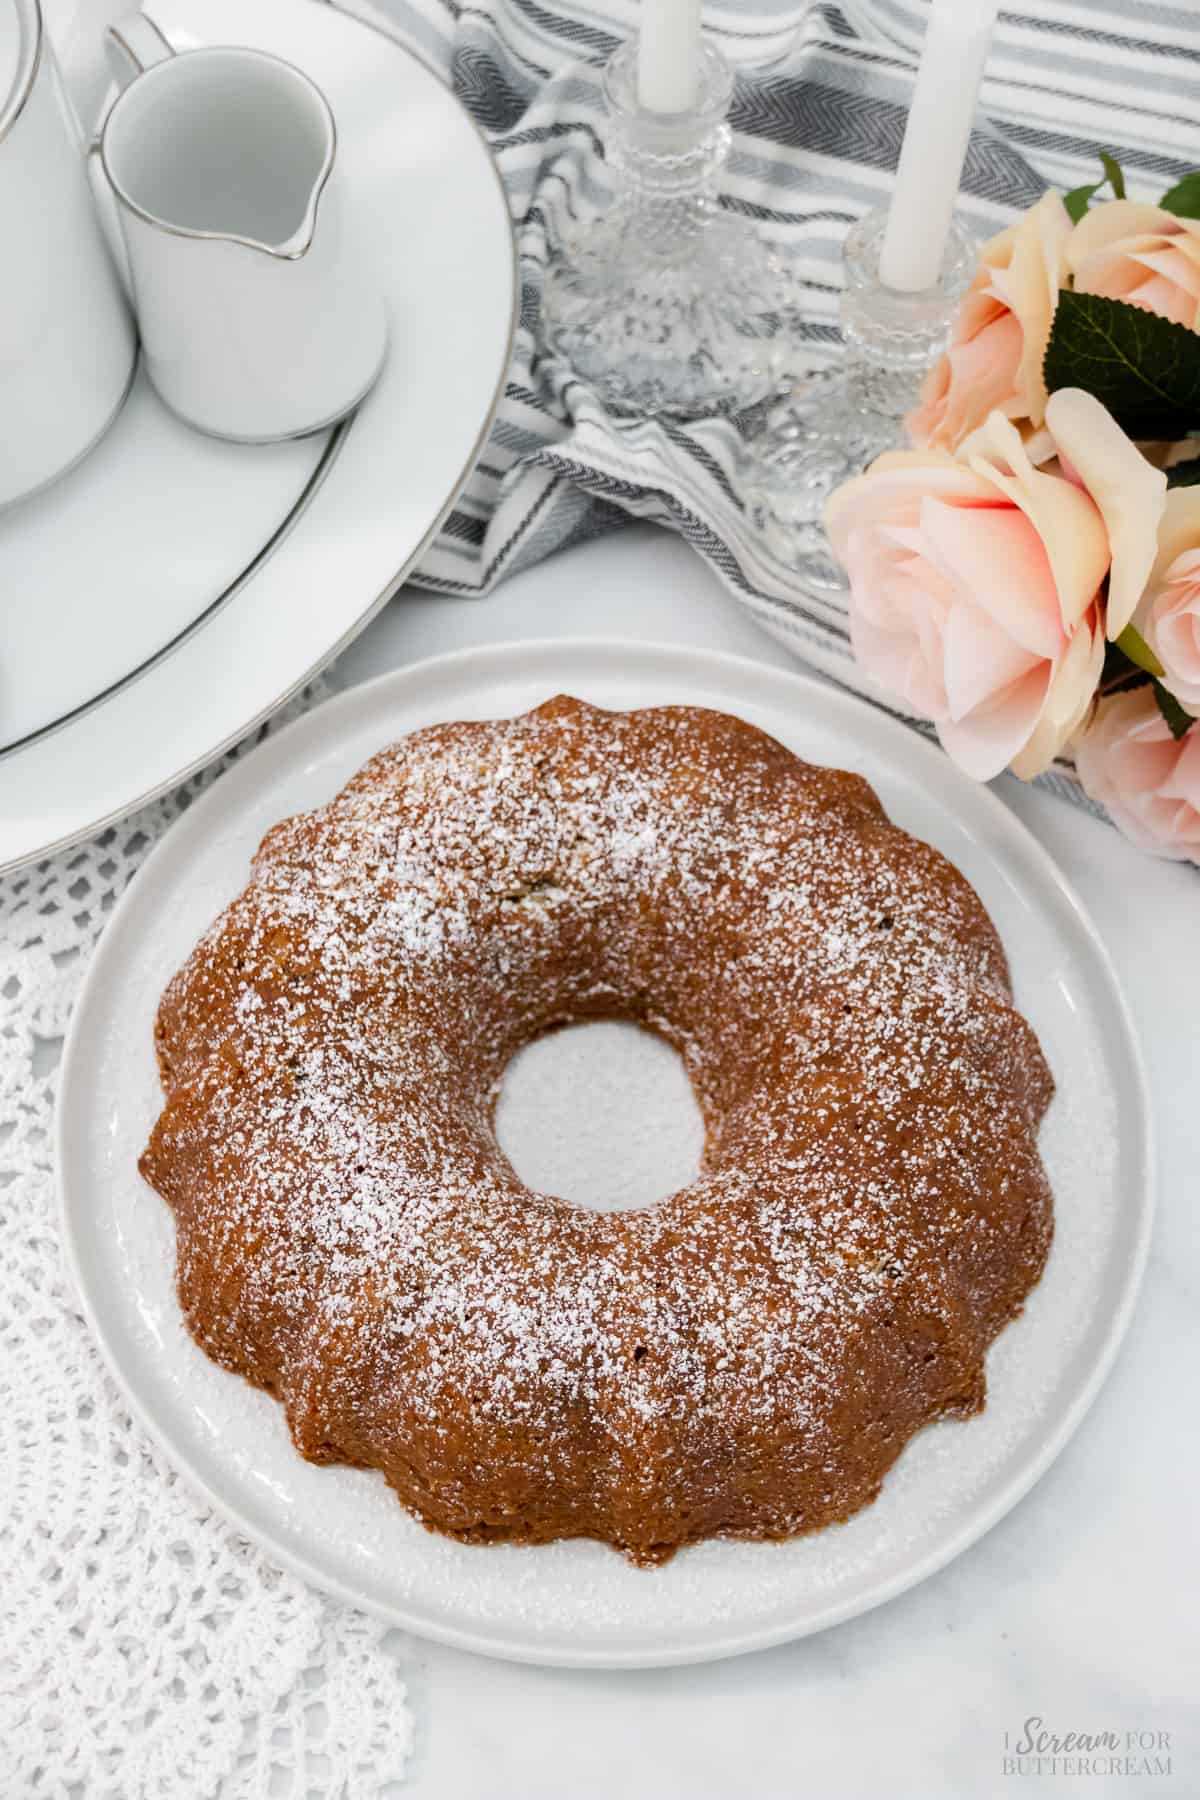 Top down view of bundt cake with powdered sugar over it with flowers and tea set and candles in the background.